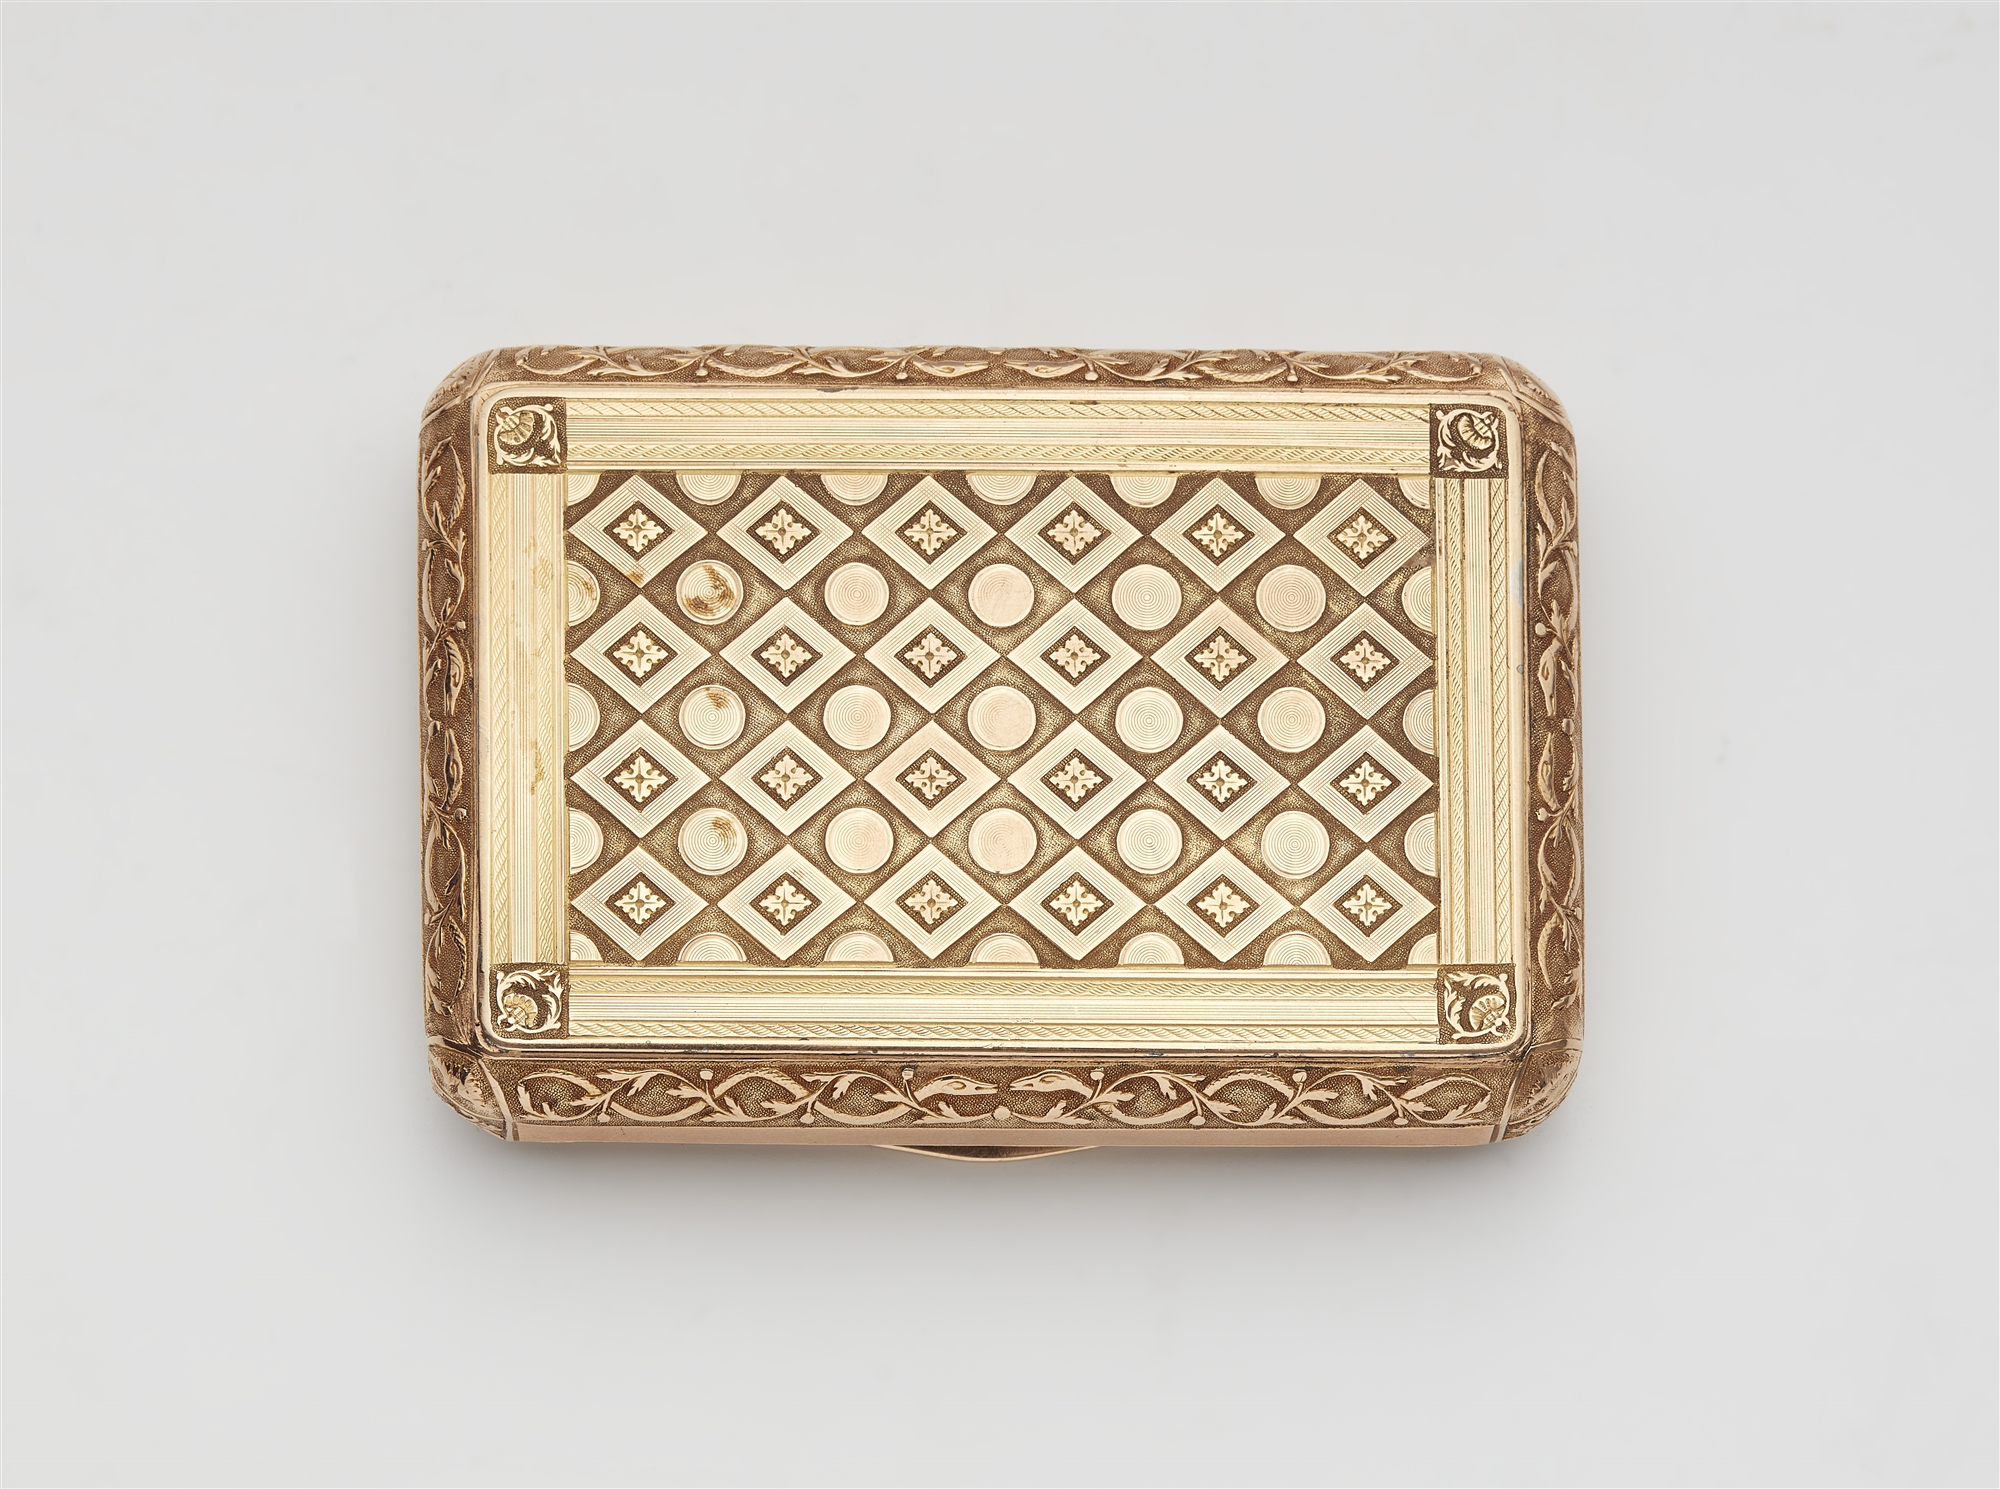 A 14k gold presentation snuff box from Prince Wilhelm of Prussia - Image 5 of 5